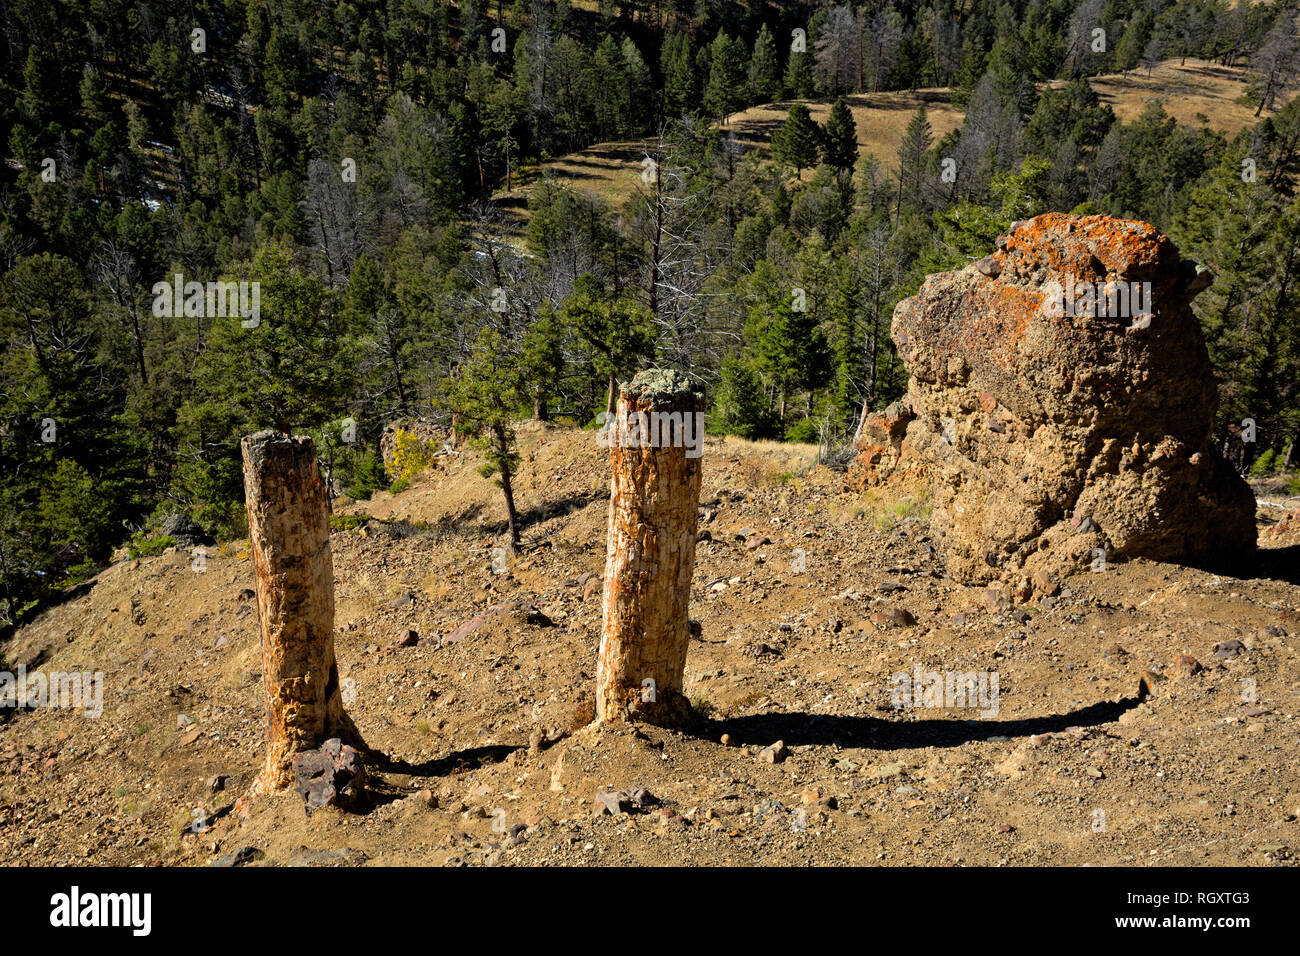 WY03083-00...WYOMING - The trunks two trees in the ancient petrified forest located on a shoulder of Speciman Ridge in Yellowstone National Park. Stock Photo